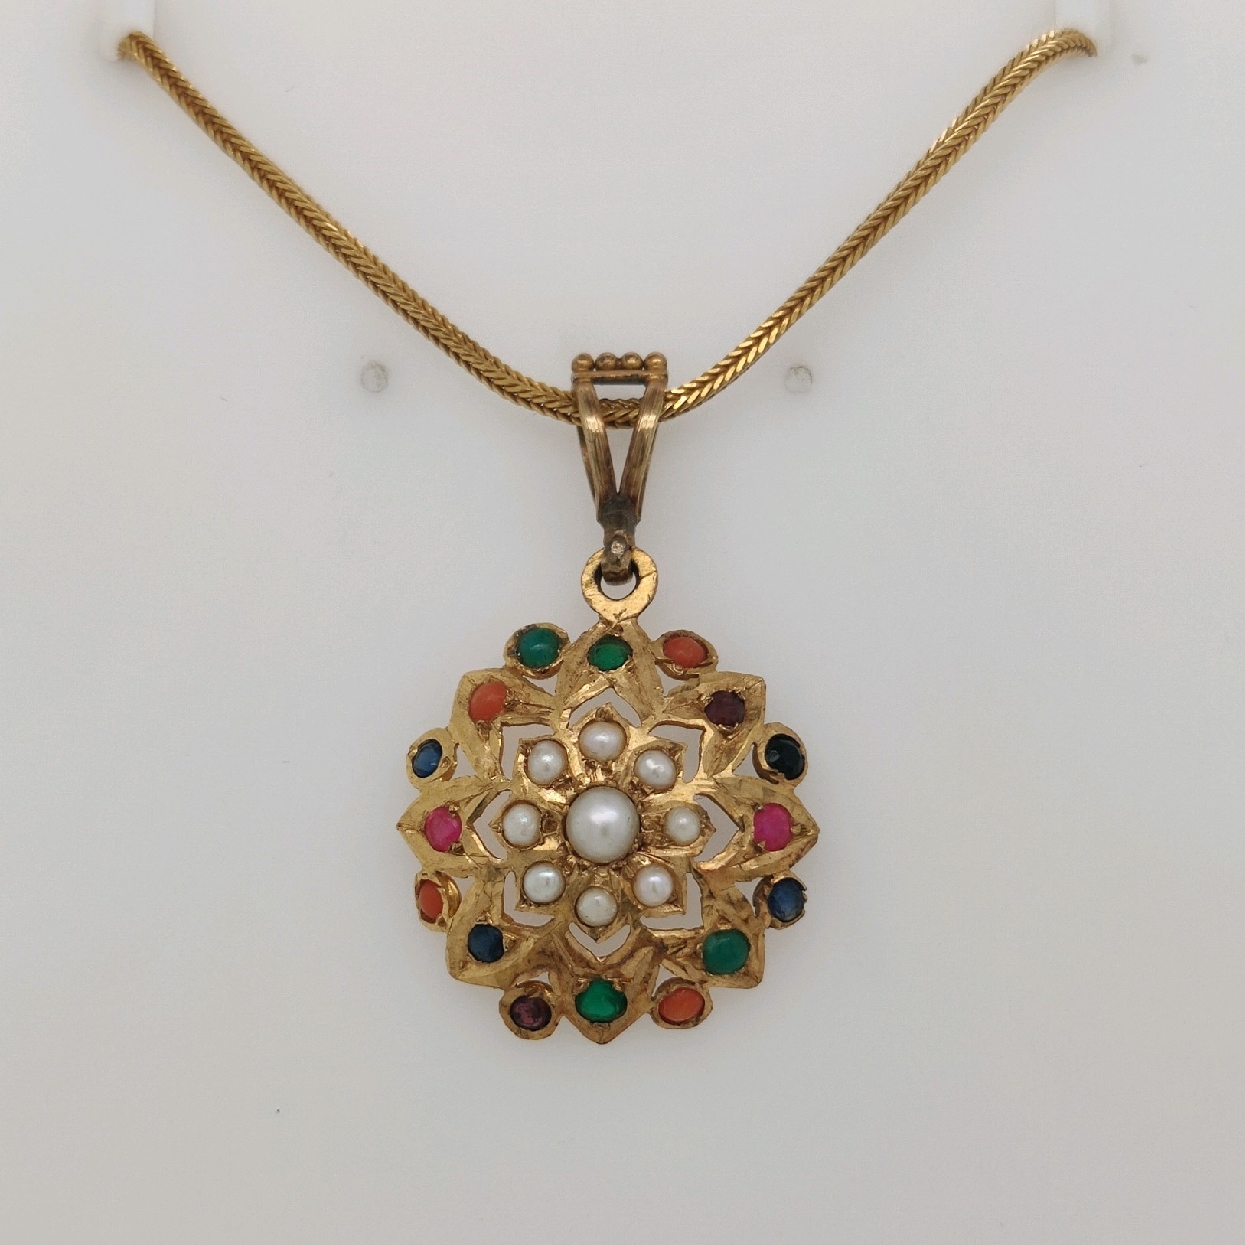 22K Yellow Gold Floral Pendant with Multicolored Gems and Pearls on a 16 inch Wheat Chain